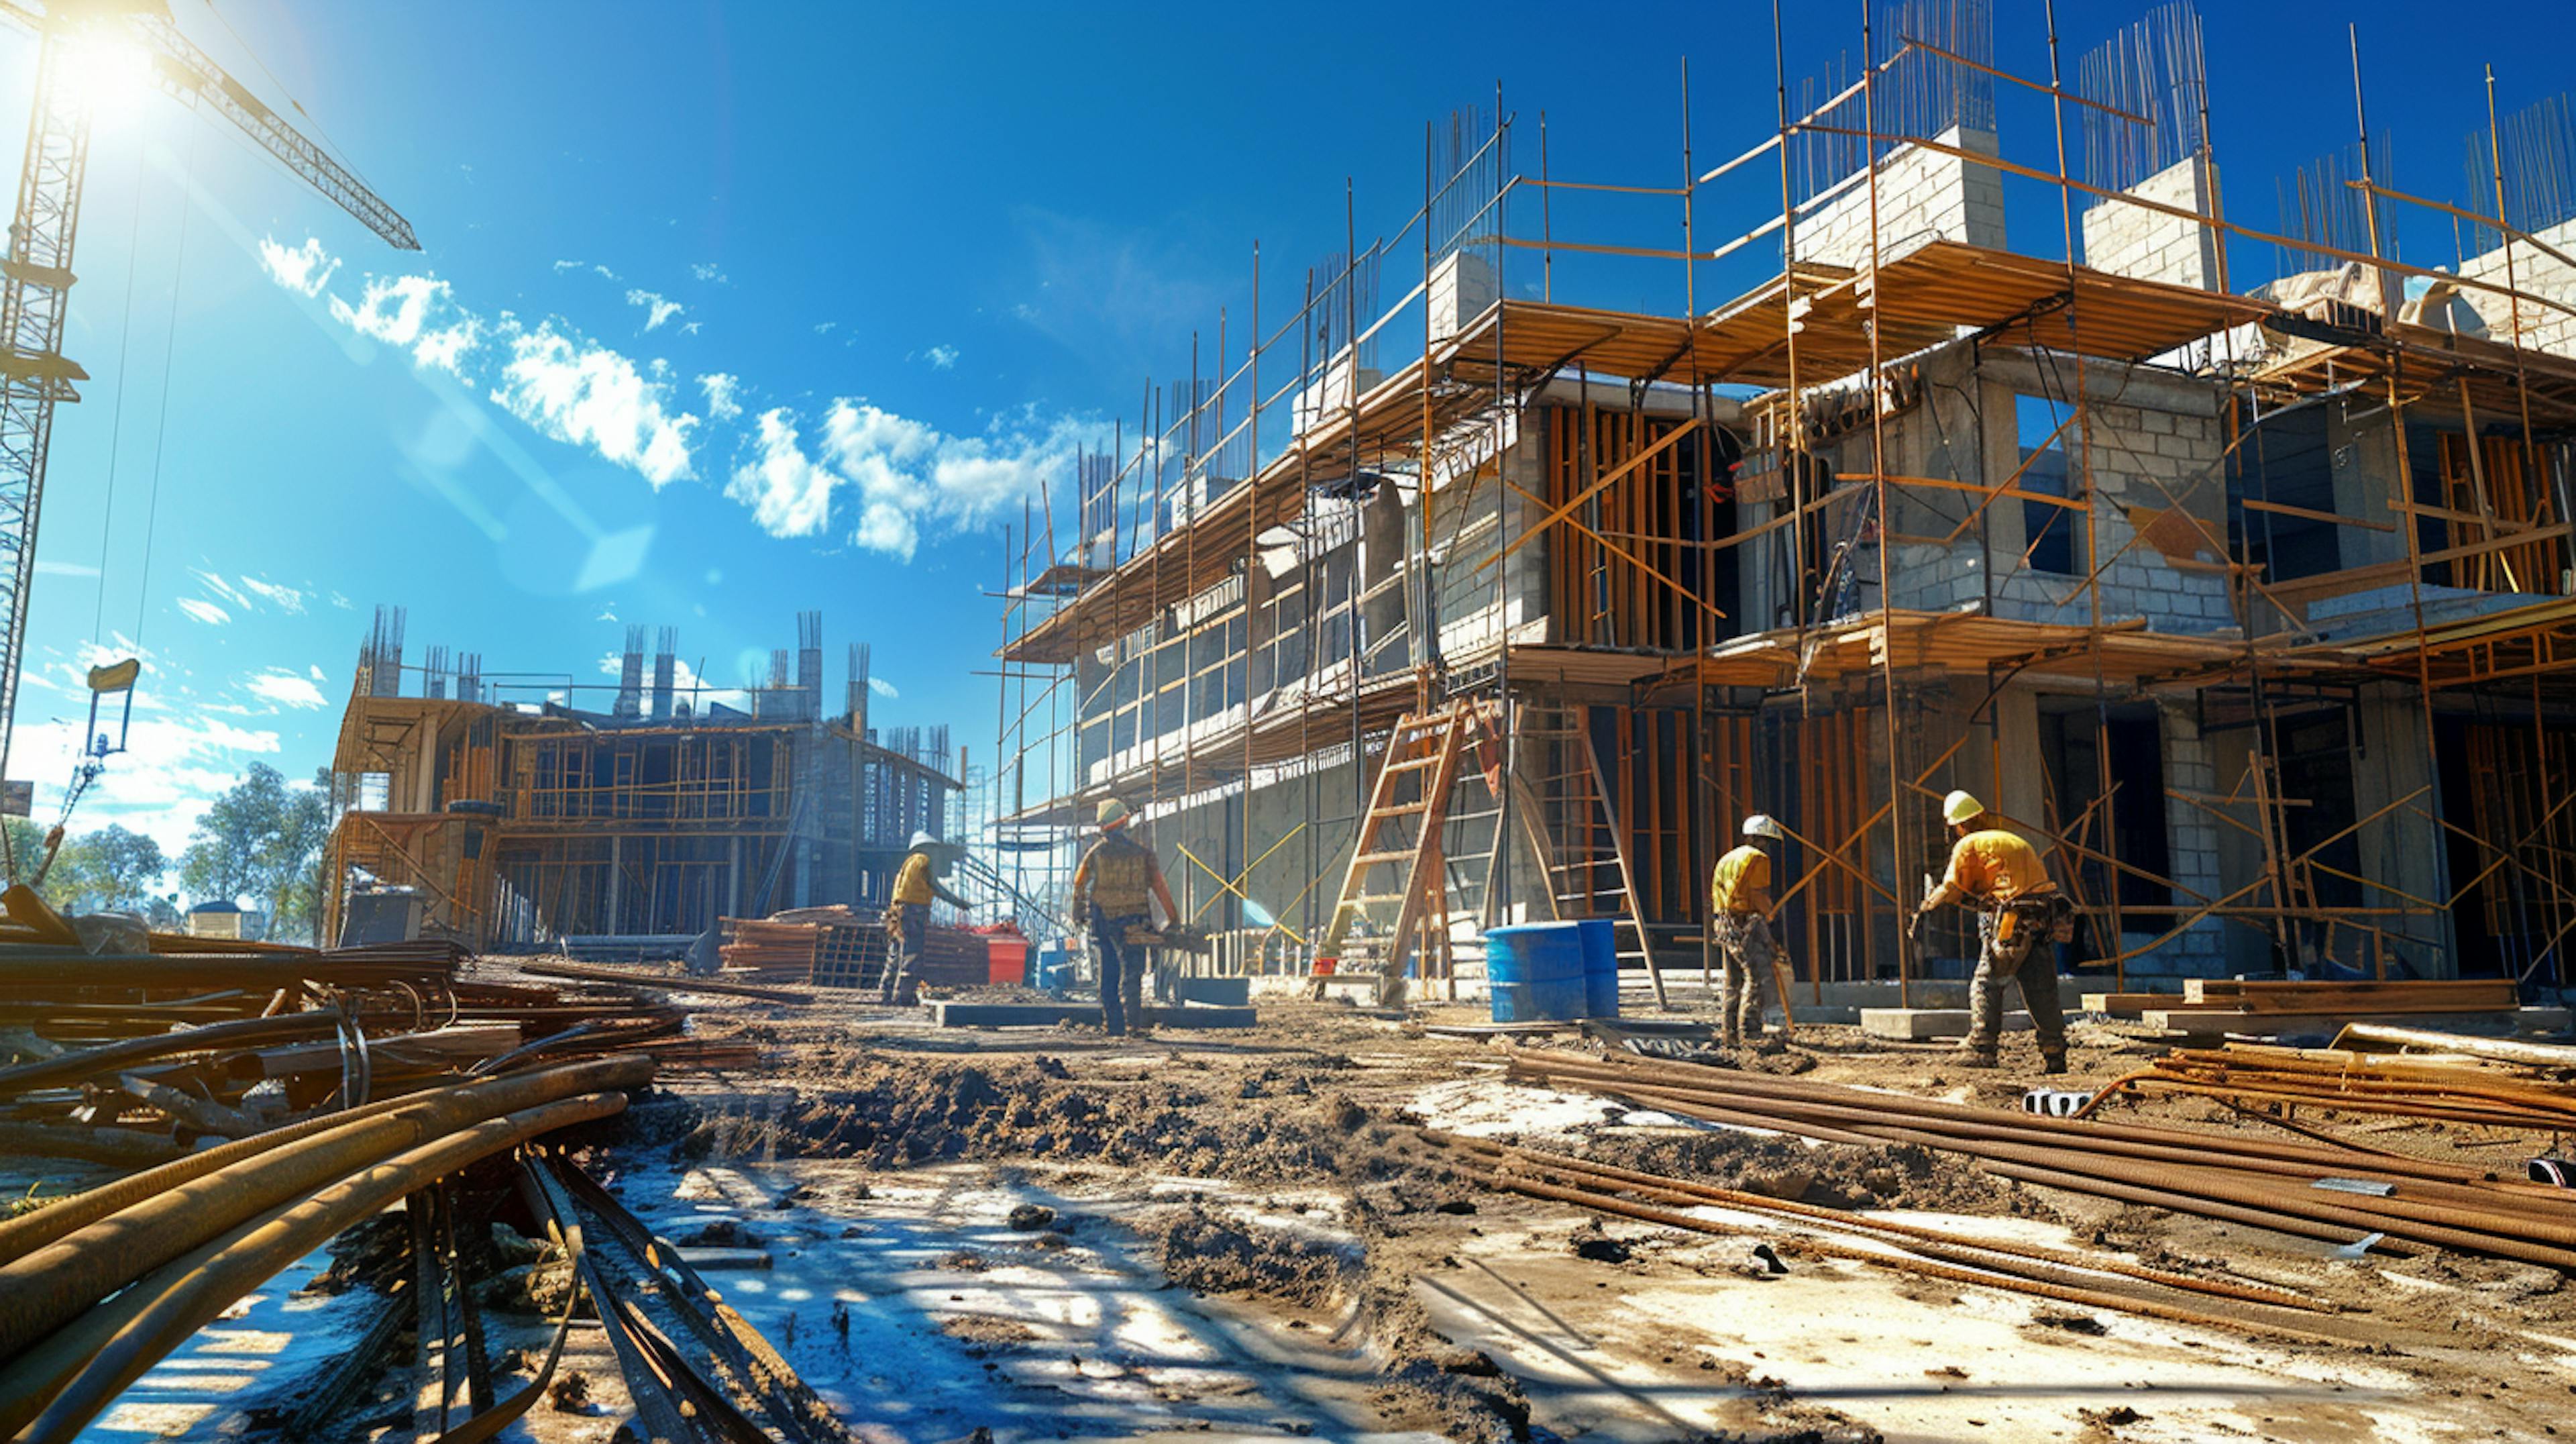 Active construction site under bright sunlight with workers in safety gear, scaffolding, and building materials, showcasing Eagle Decor's project progress